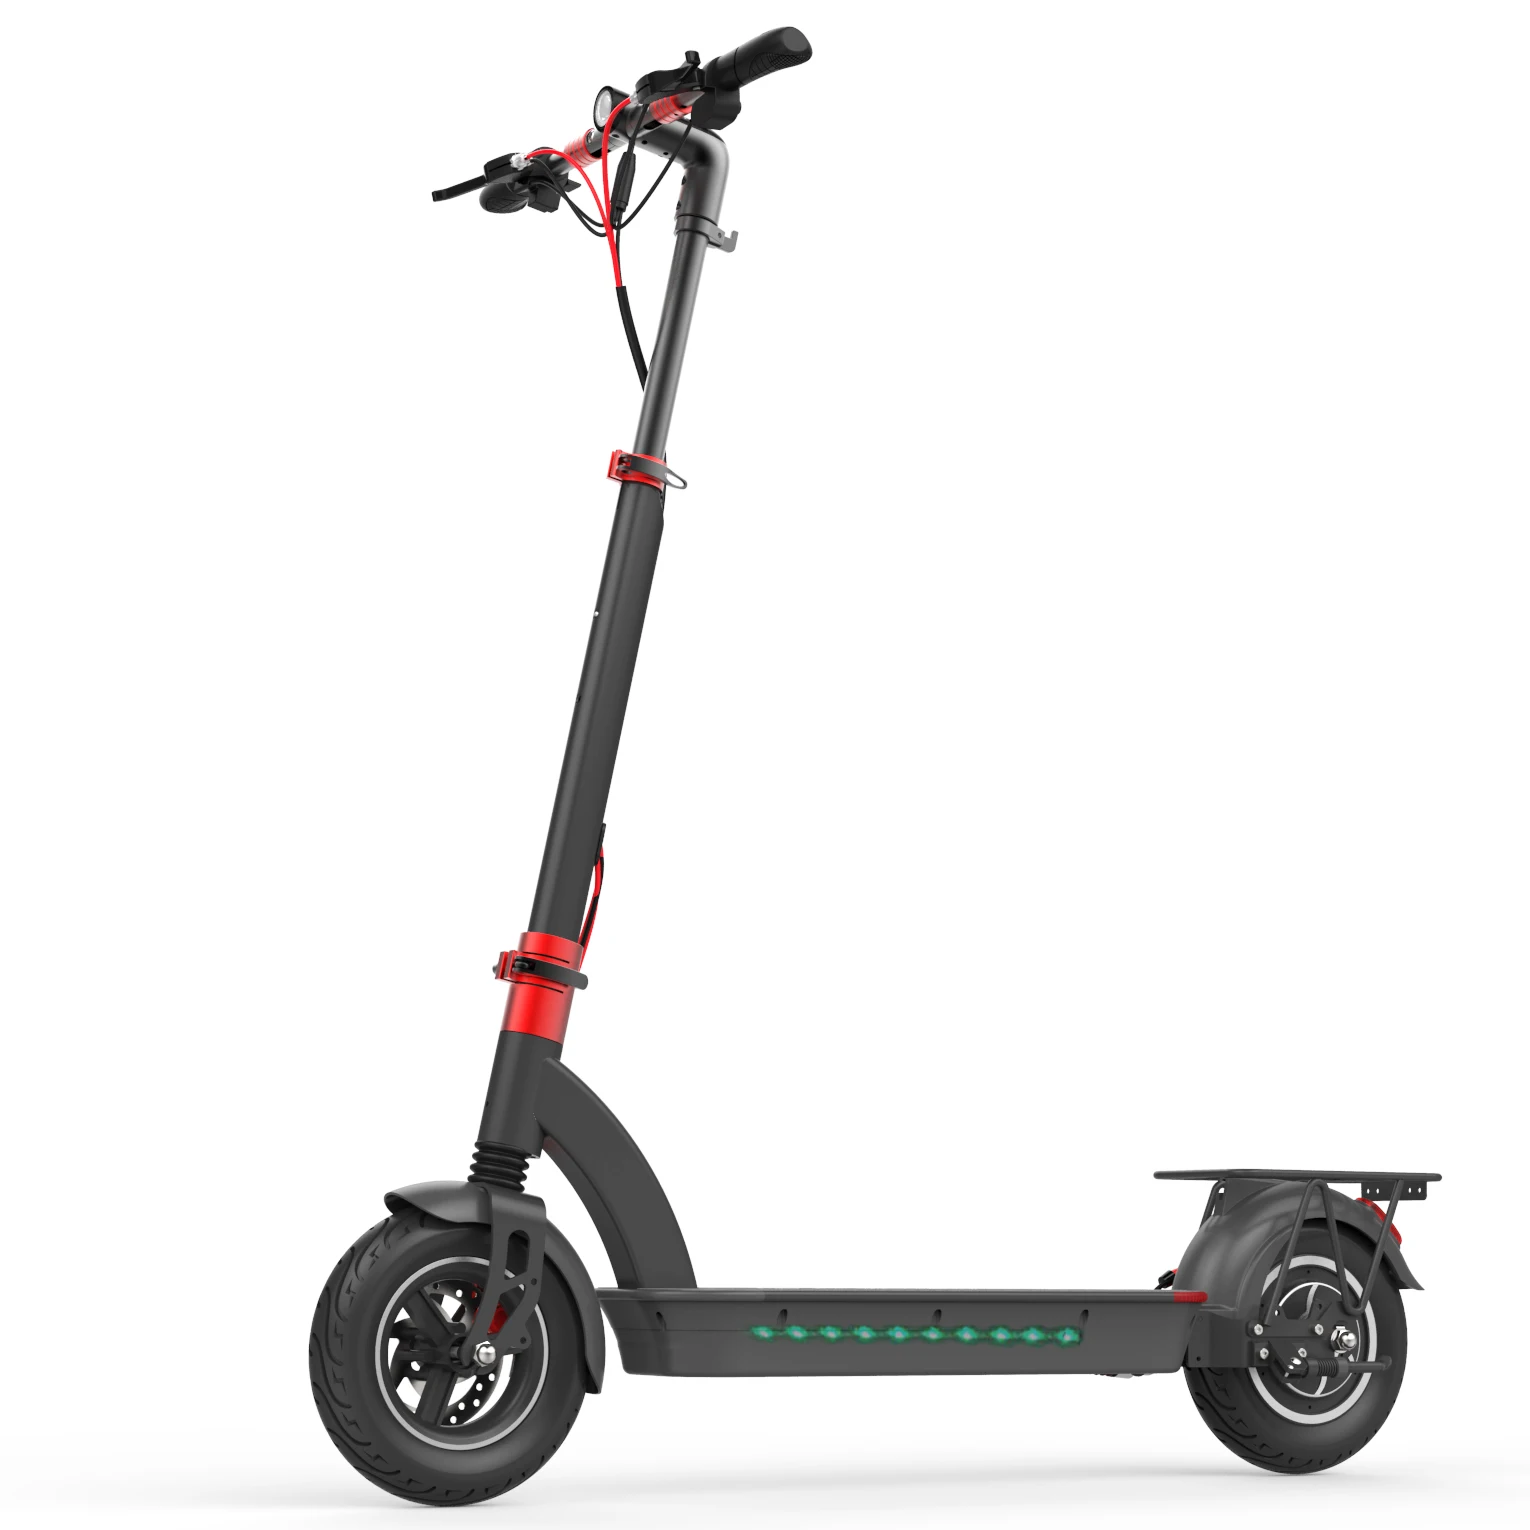 
aerlang 10 inch off road electric scooter for adults 